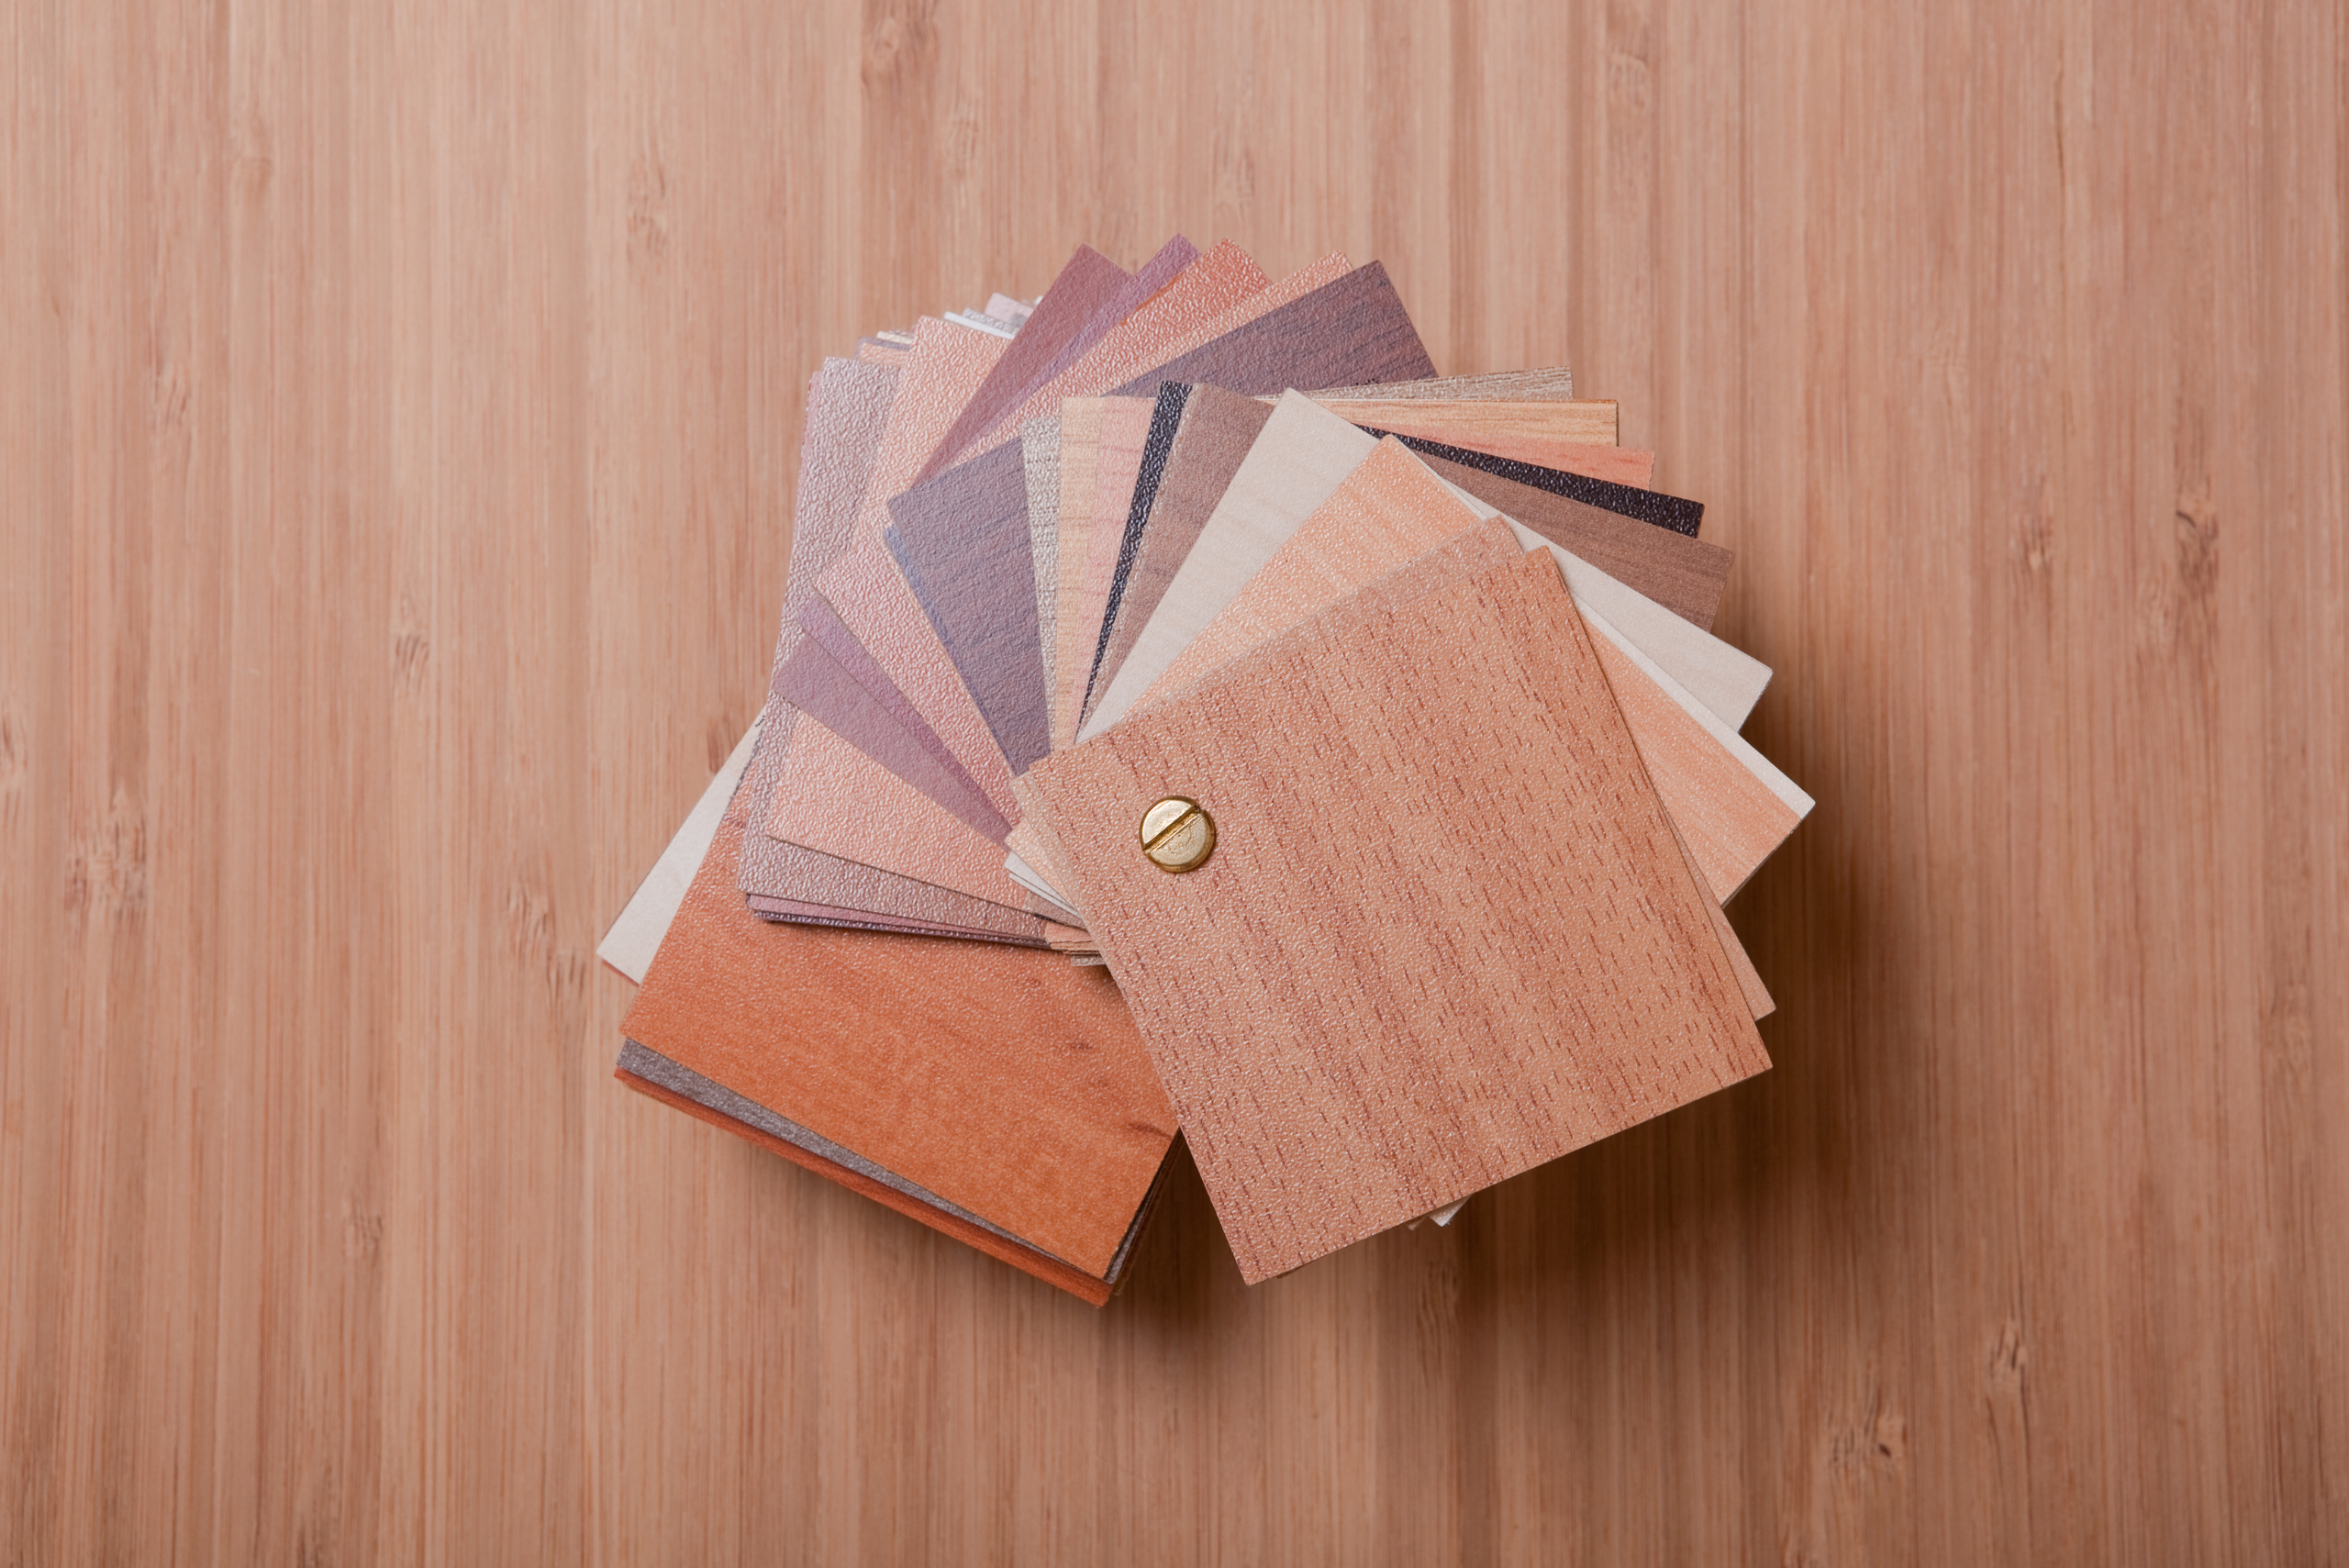 Samples of different wood finishes.